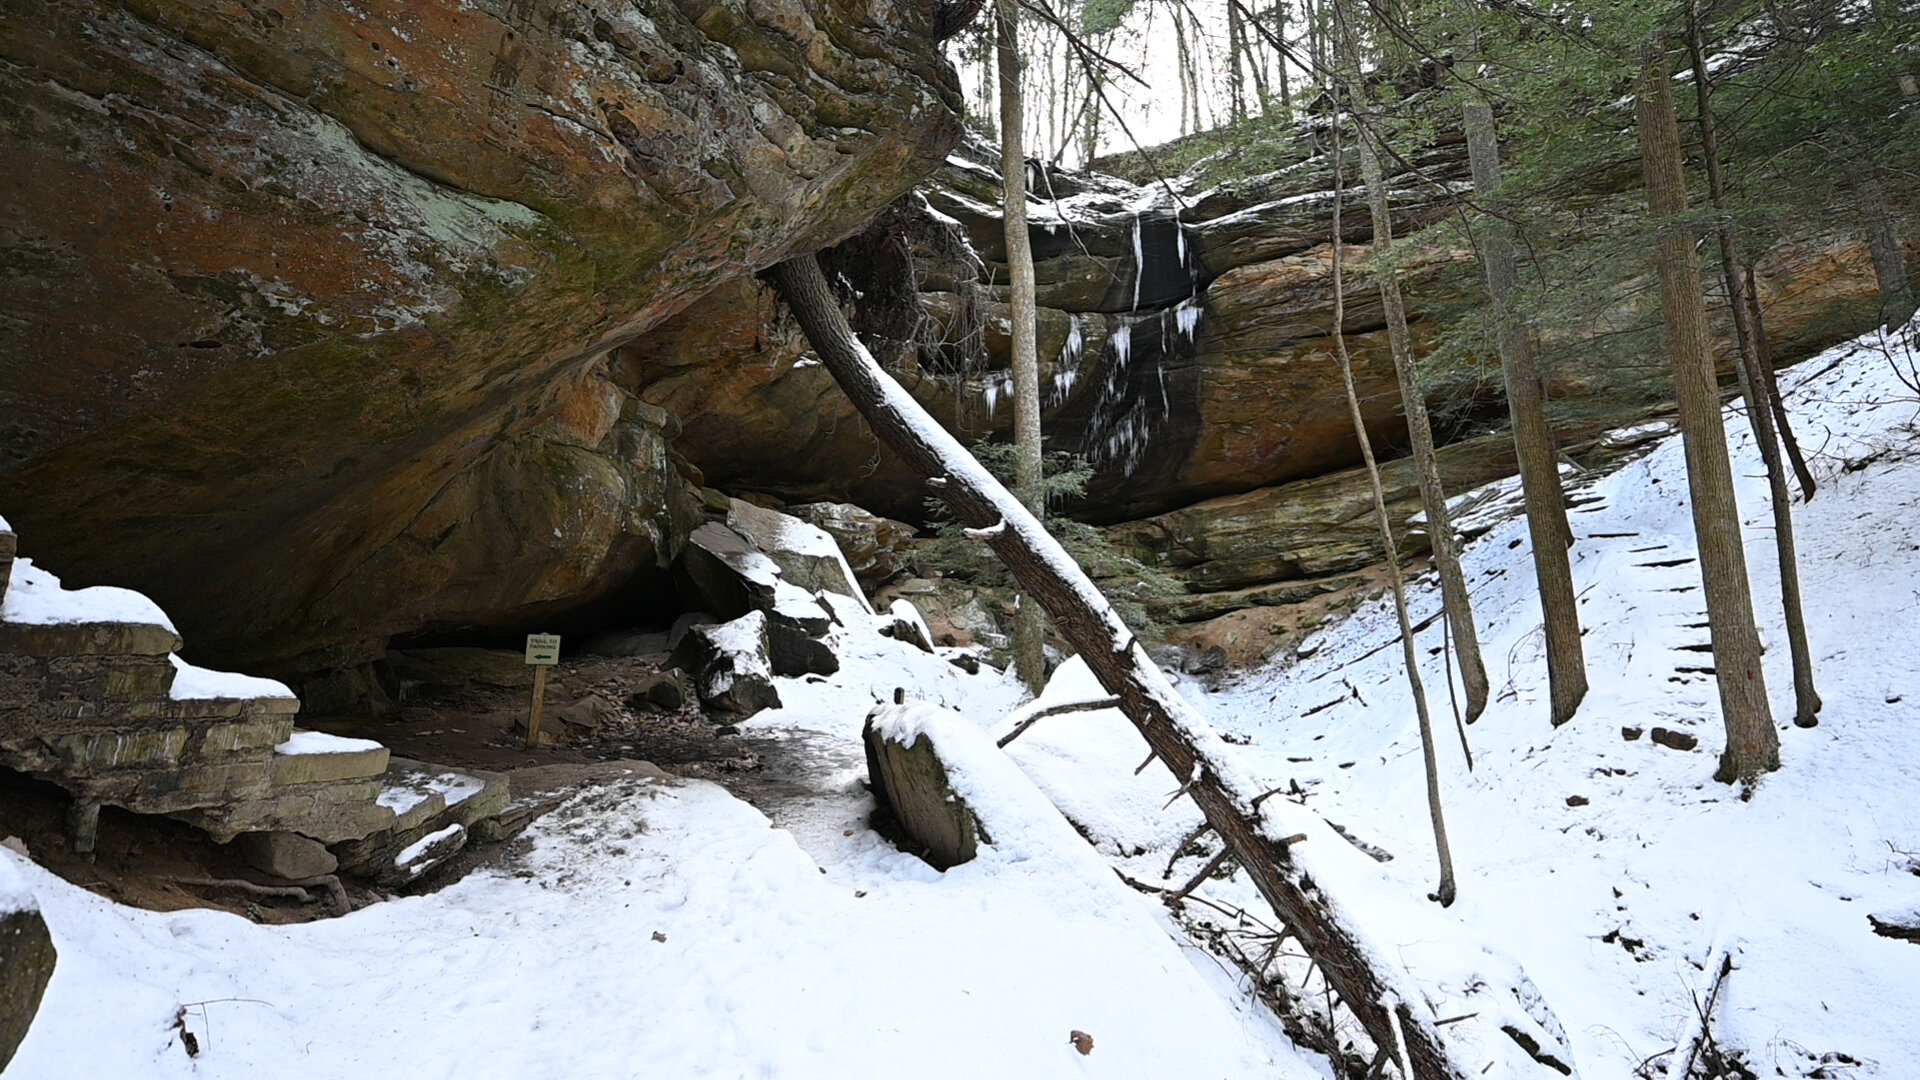 Winter Hiking Cantwell Cliffs Rim Trail at Hocking Hills State Park, Ohio